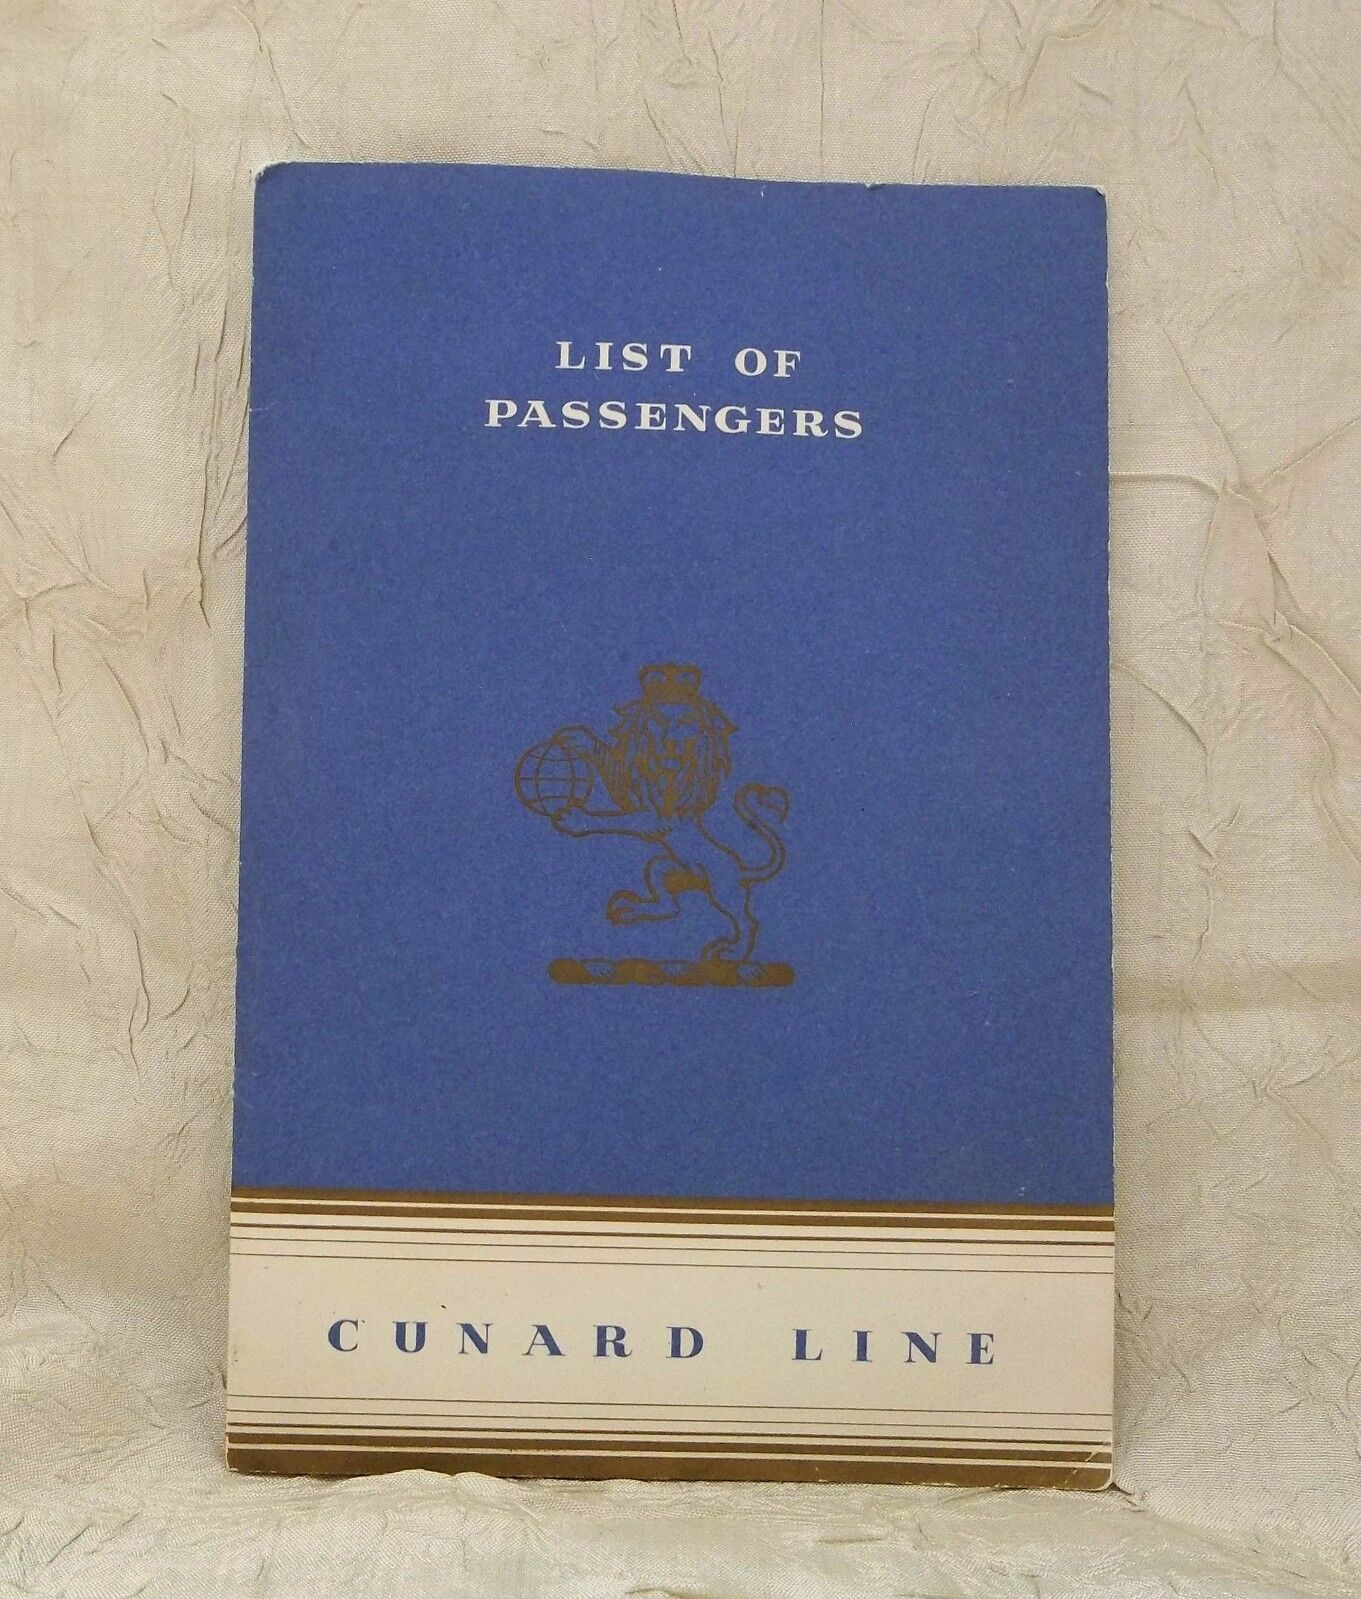 R.M.S. Queen Mary 1952 List Of Passengers Cunard Line White Star Southampton 